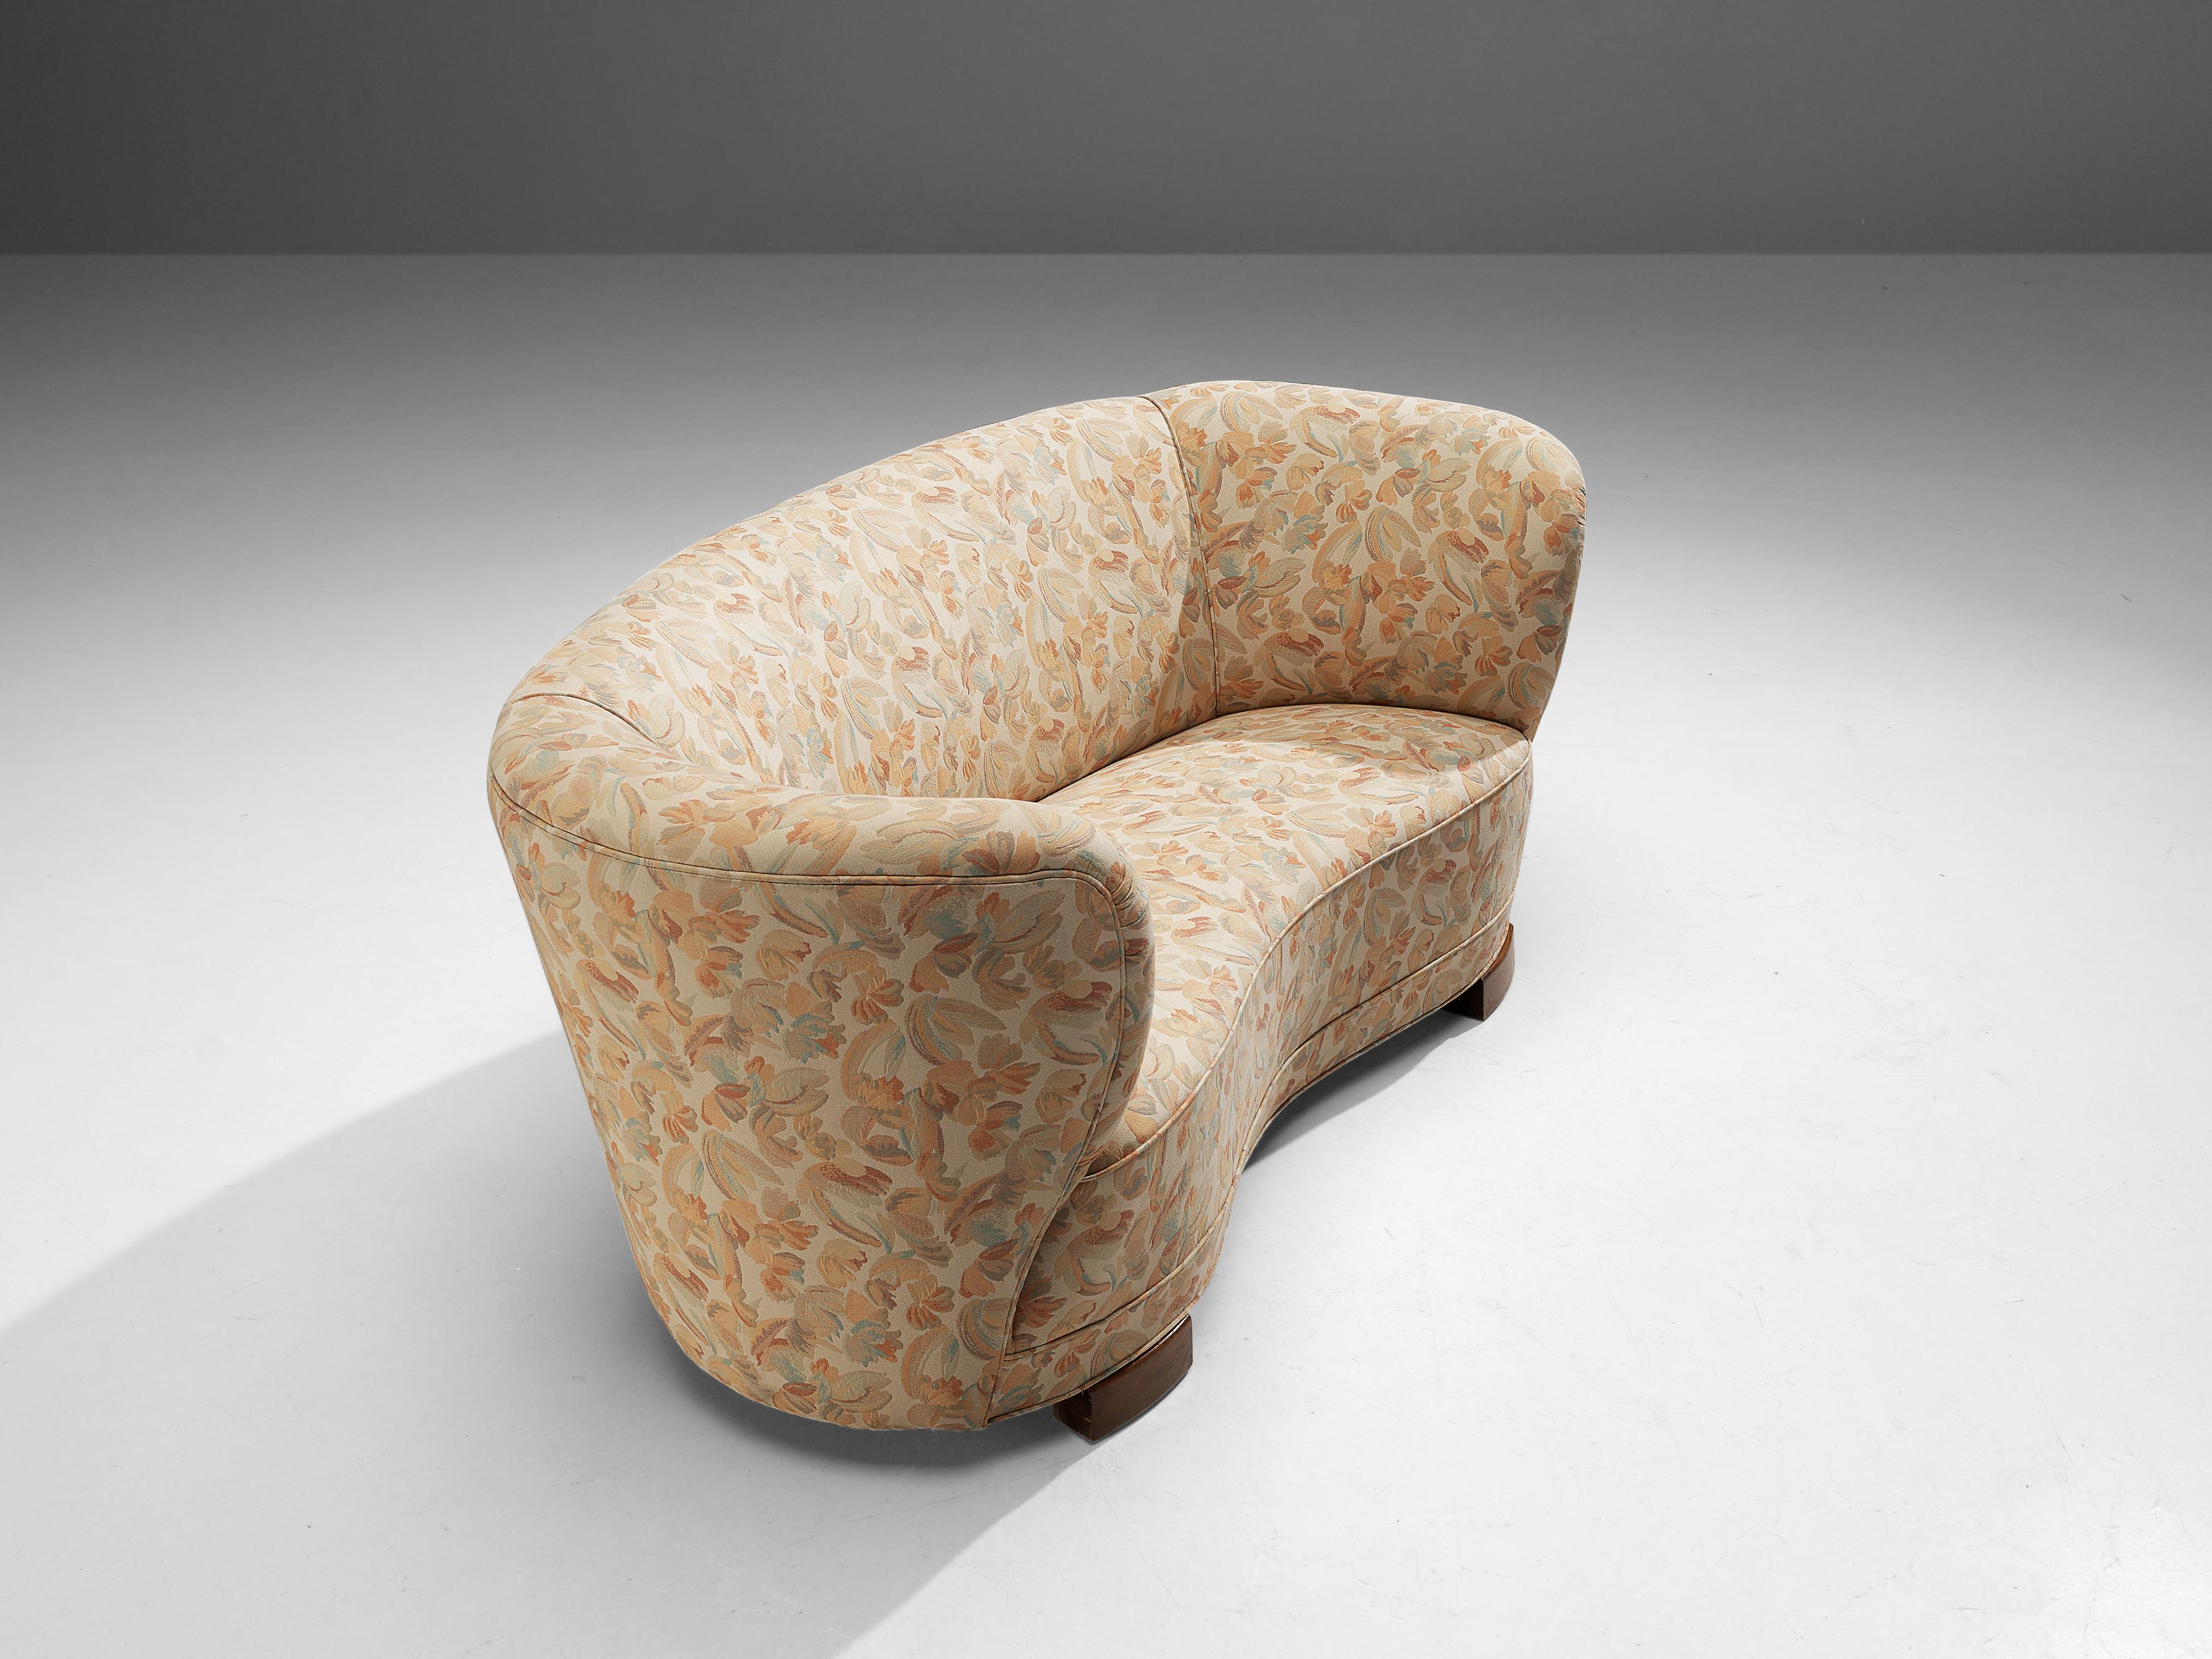 Curved sofa, floral fabric, wood, Denmark, 1950s

This voluptuous sofa is executed with wooden legs and a floral fabric. The sofa has a high lined and curved back, while the backrest is horizontal straight and flows over into the bulky armrests.